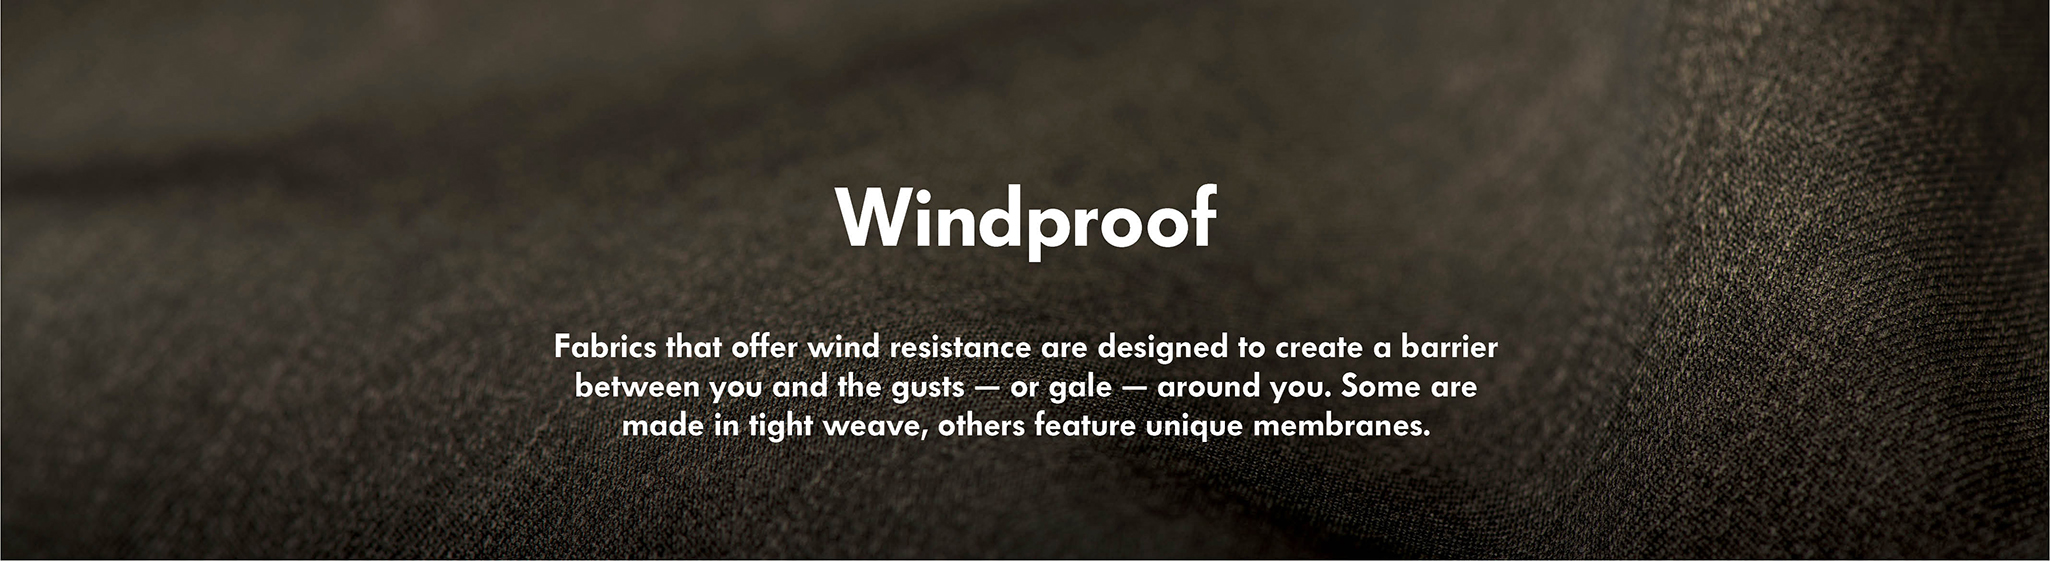 Windproof - Protecting you from the wind...